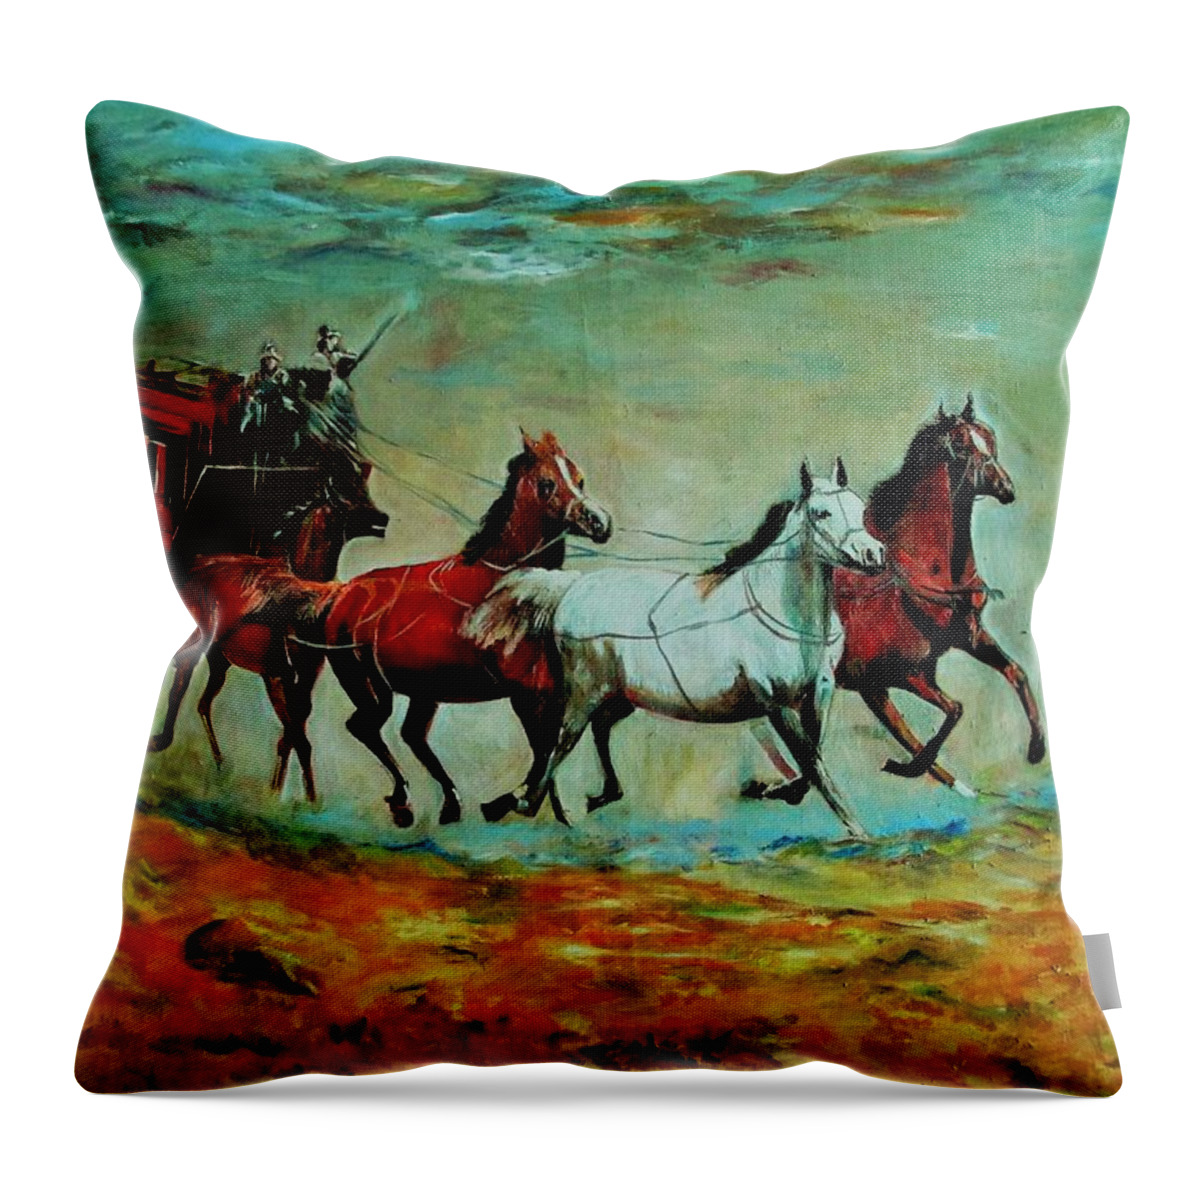 Chariot Throw Pillow featuring the painting Horse Chariot by Khalid Saeed